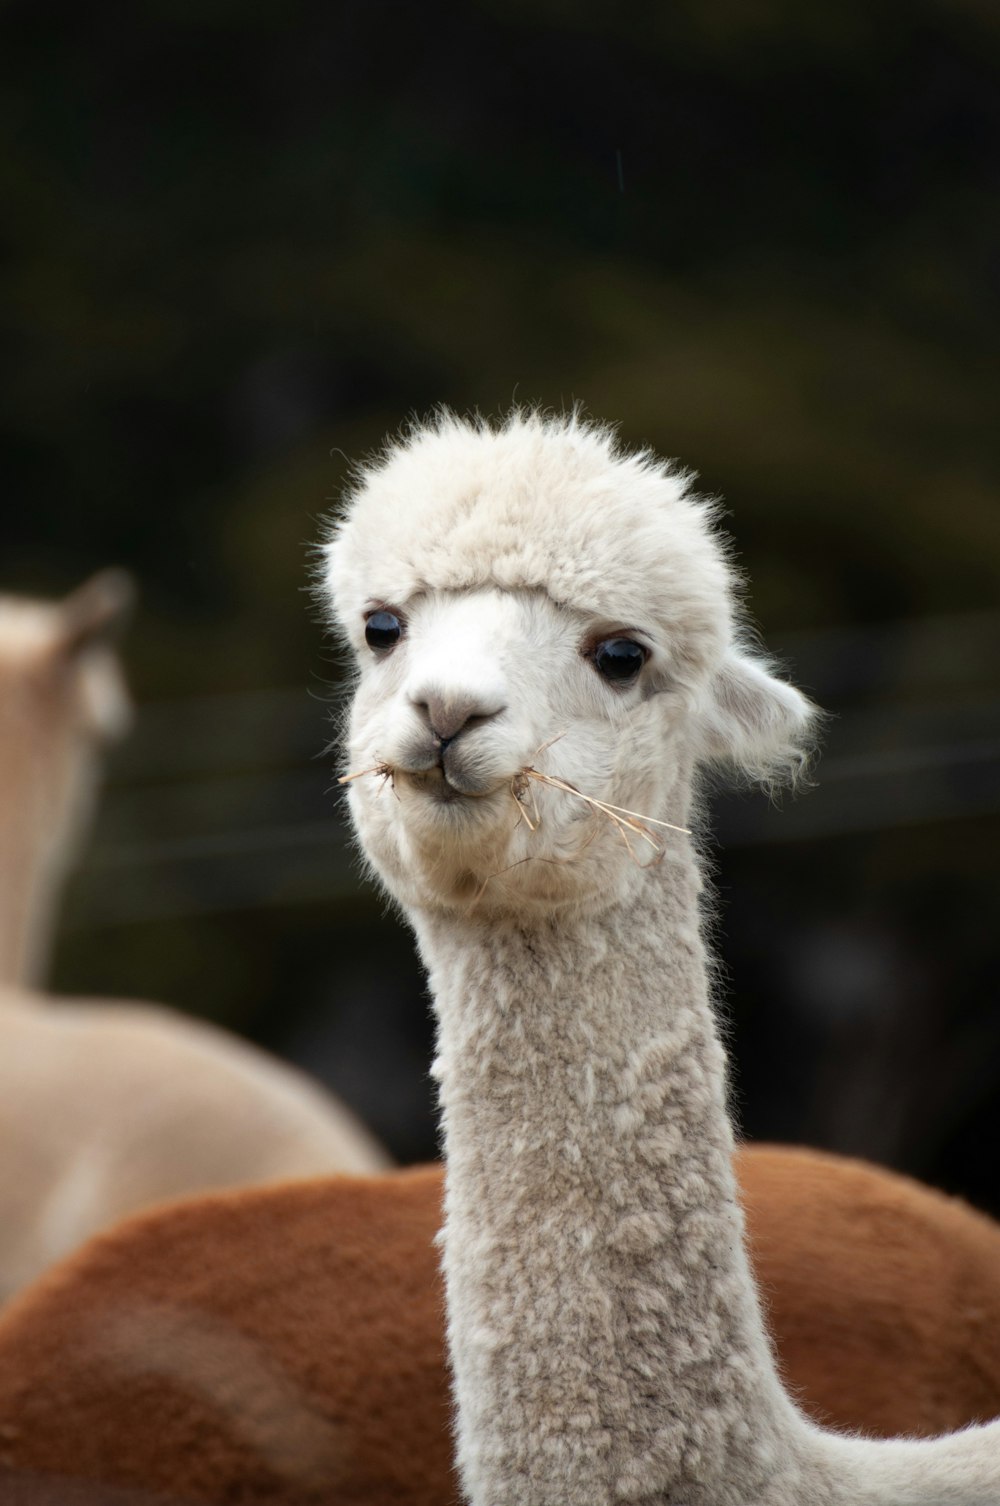 a close up of a llama with another llama in the background